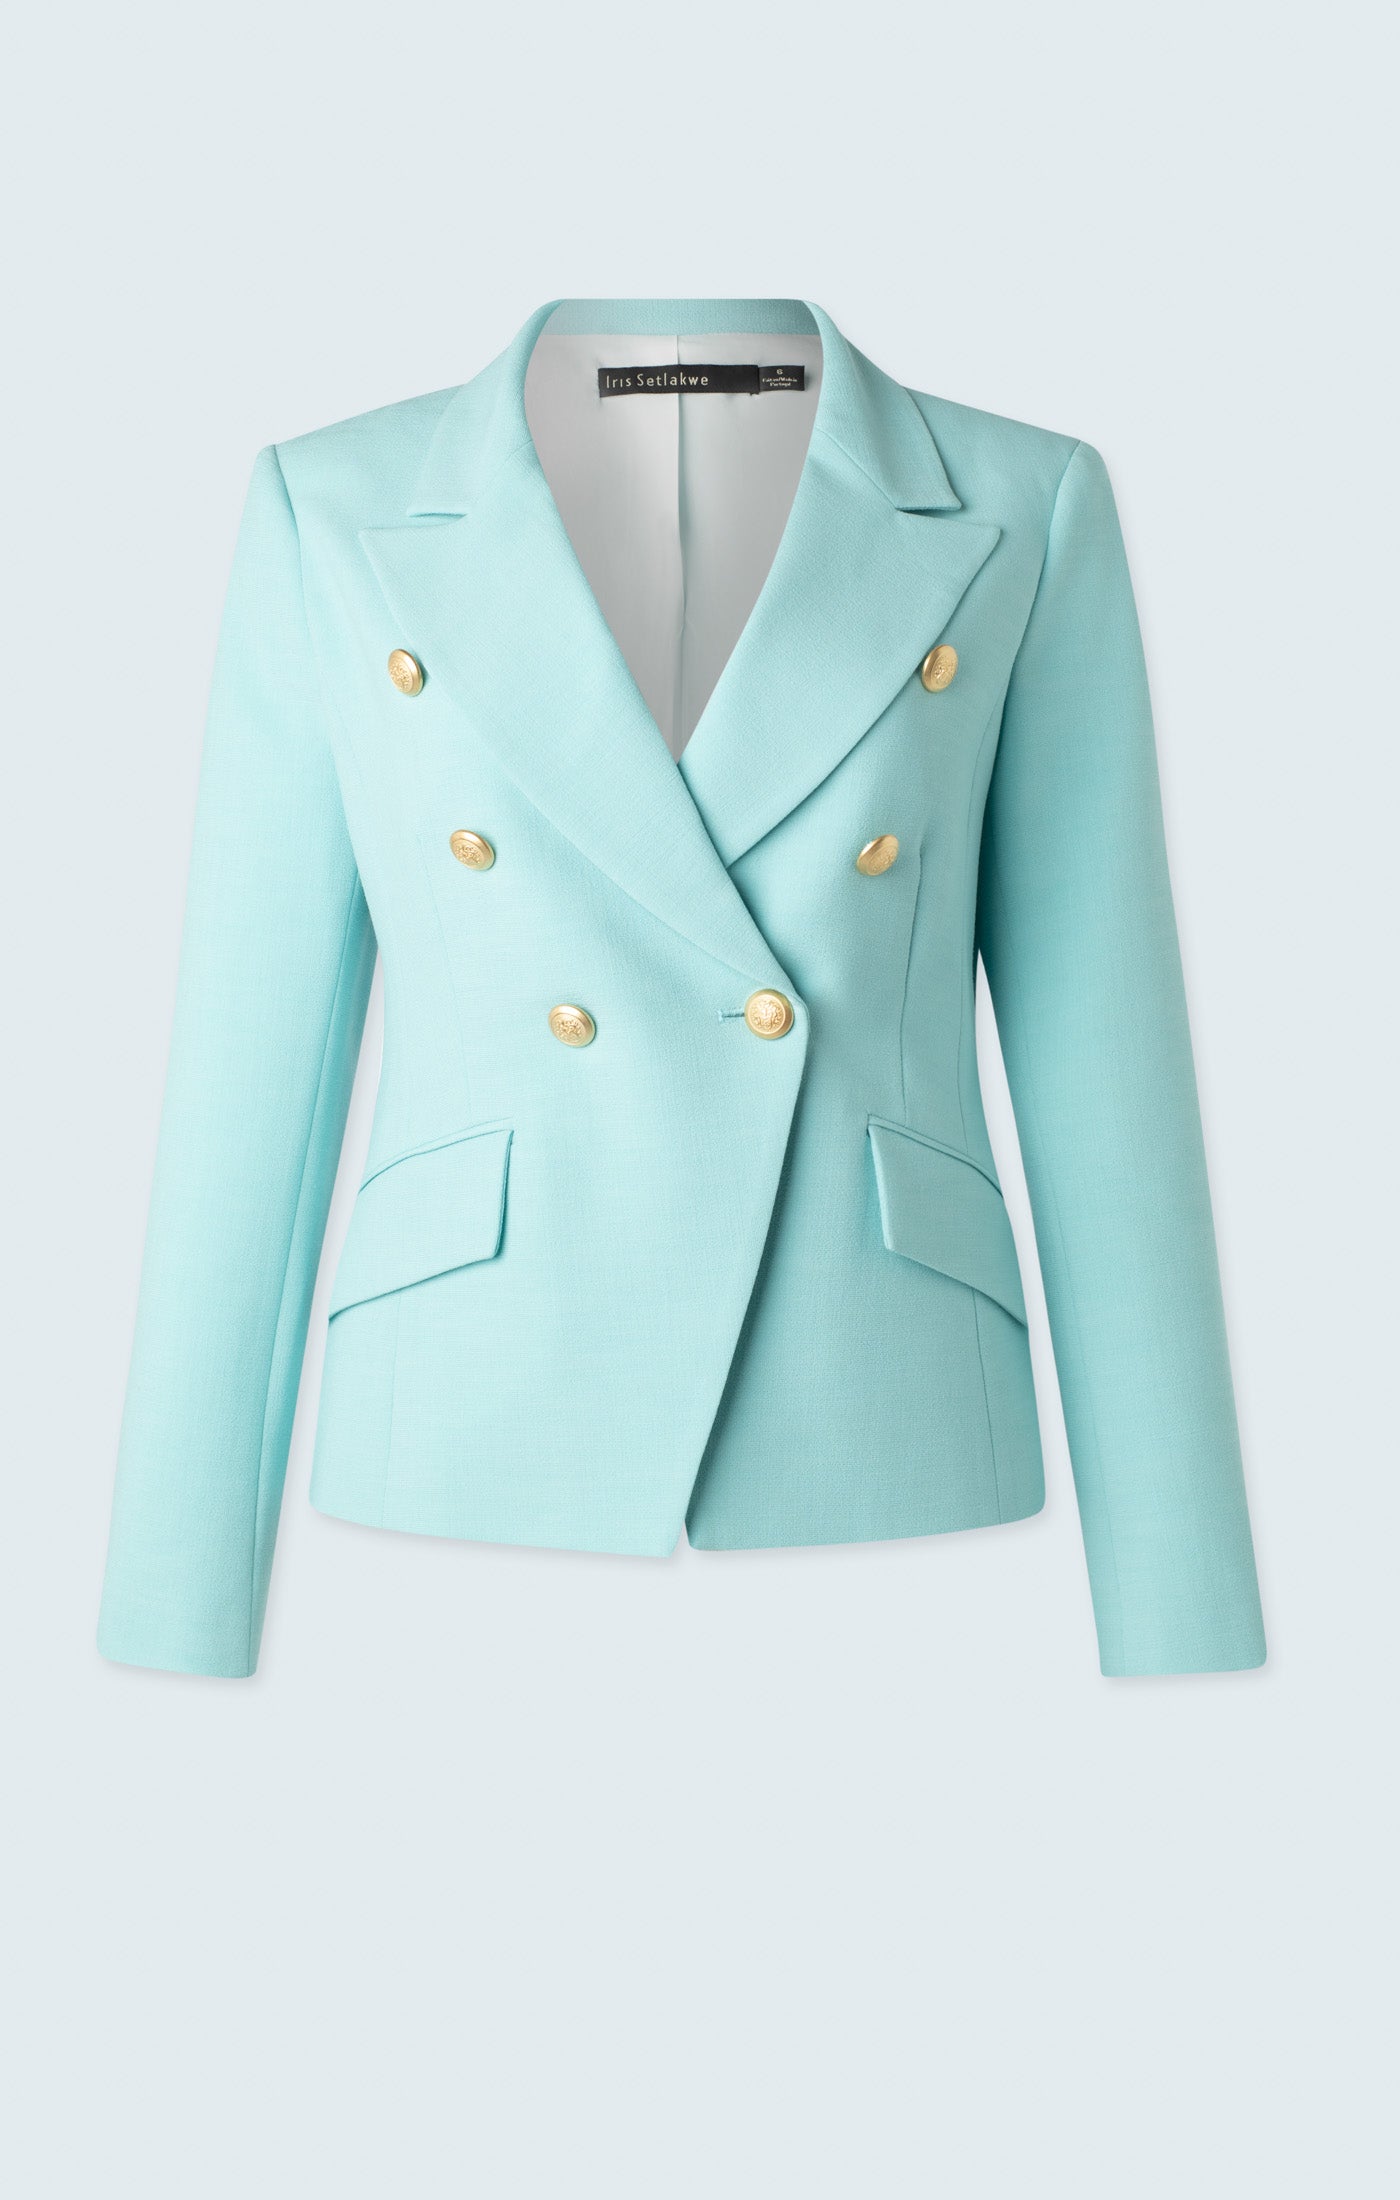 Jacket with 6 buttons